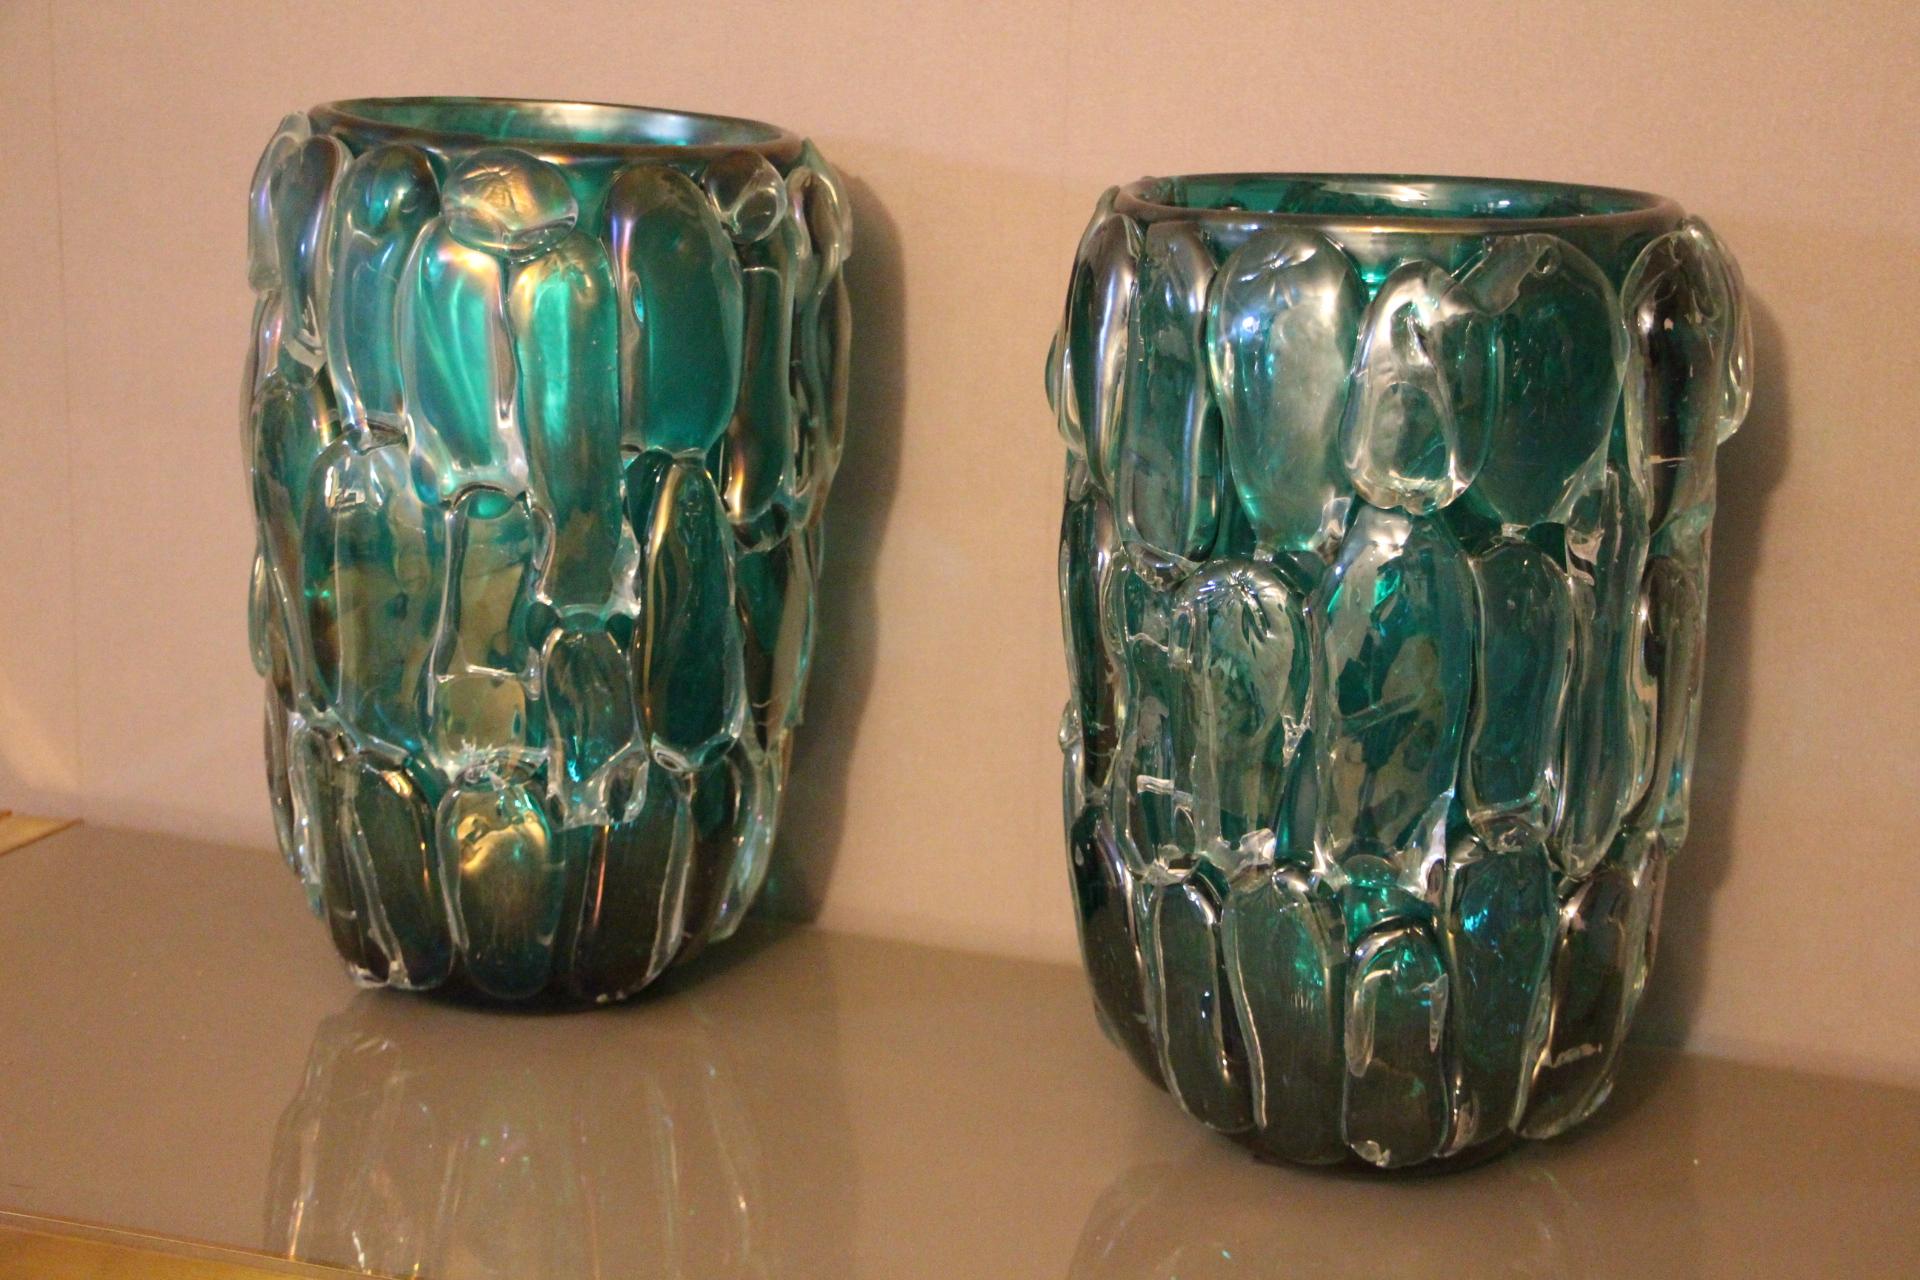 20th Century Pair of Large Emerald Green Color and Iridescent Murano Glass Vases by Cenedese